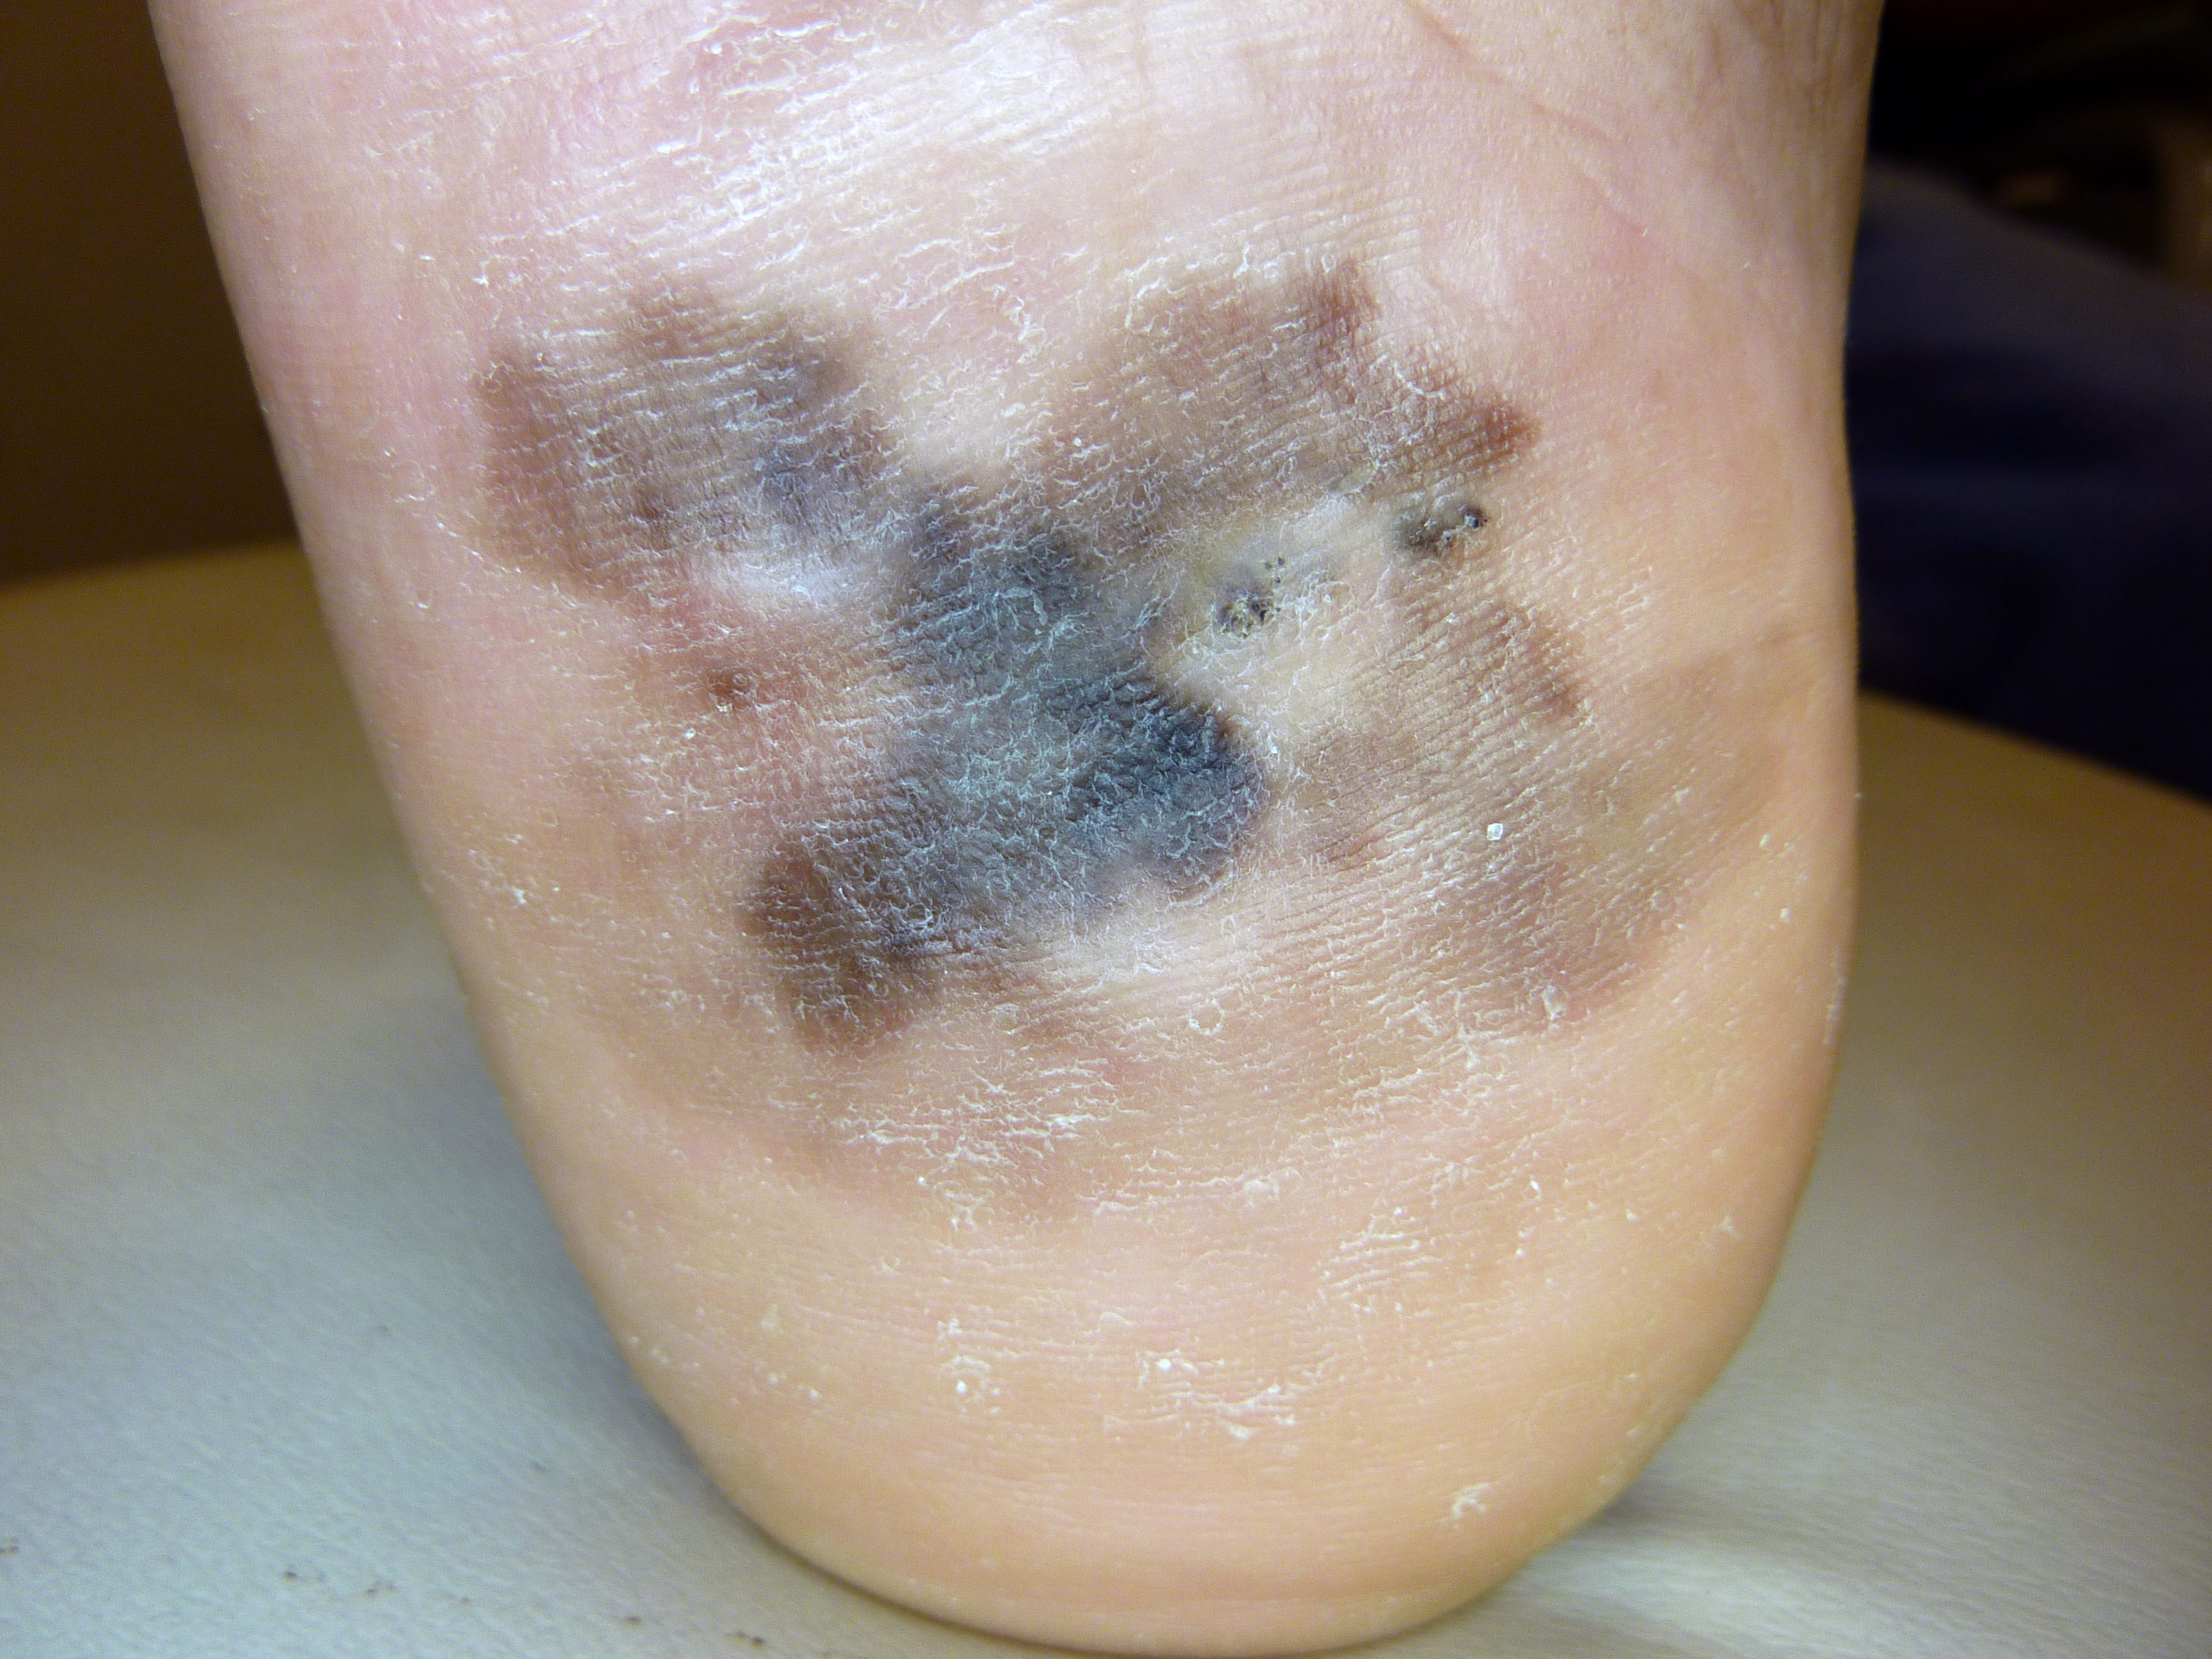 Clinical photo of an acral lentiginous melanoma.  This large lesion has irregular borders and has variable pigmentation from light brown to black. 